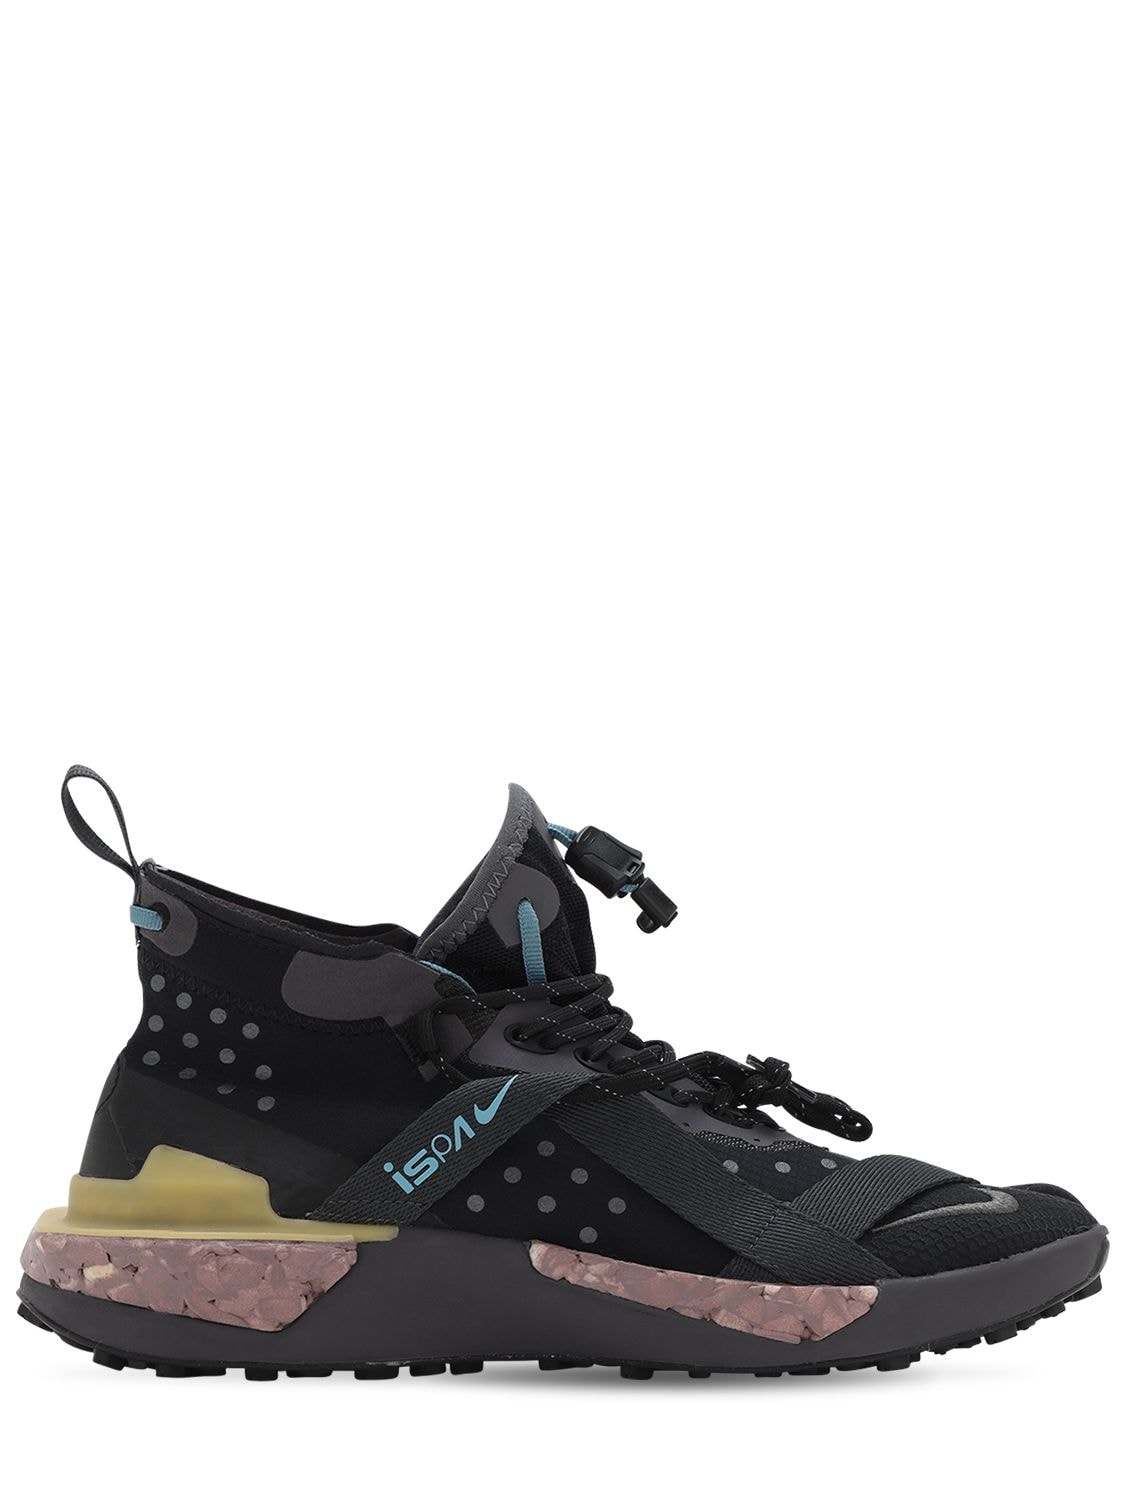 Ispa Drifter Sneakers for Womens at Goxip